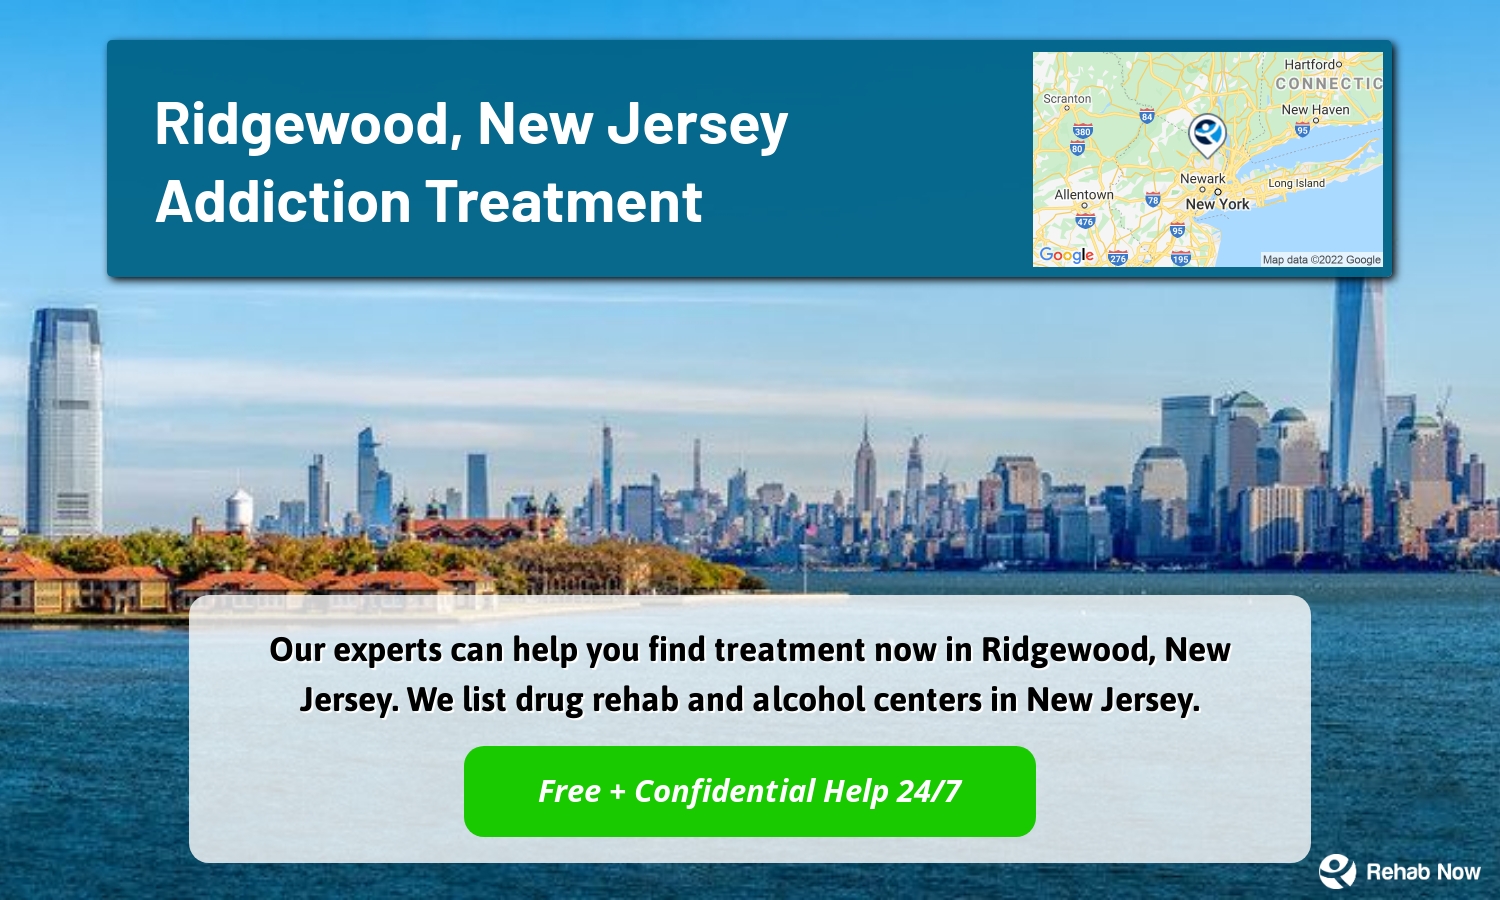 Our experts can help you find treatment now in Ridgewood, New Jersey. We list drug rehab and alcohol centers in New Jersey.